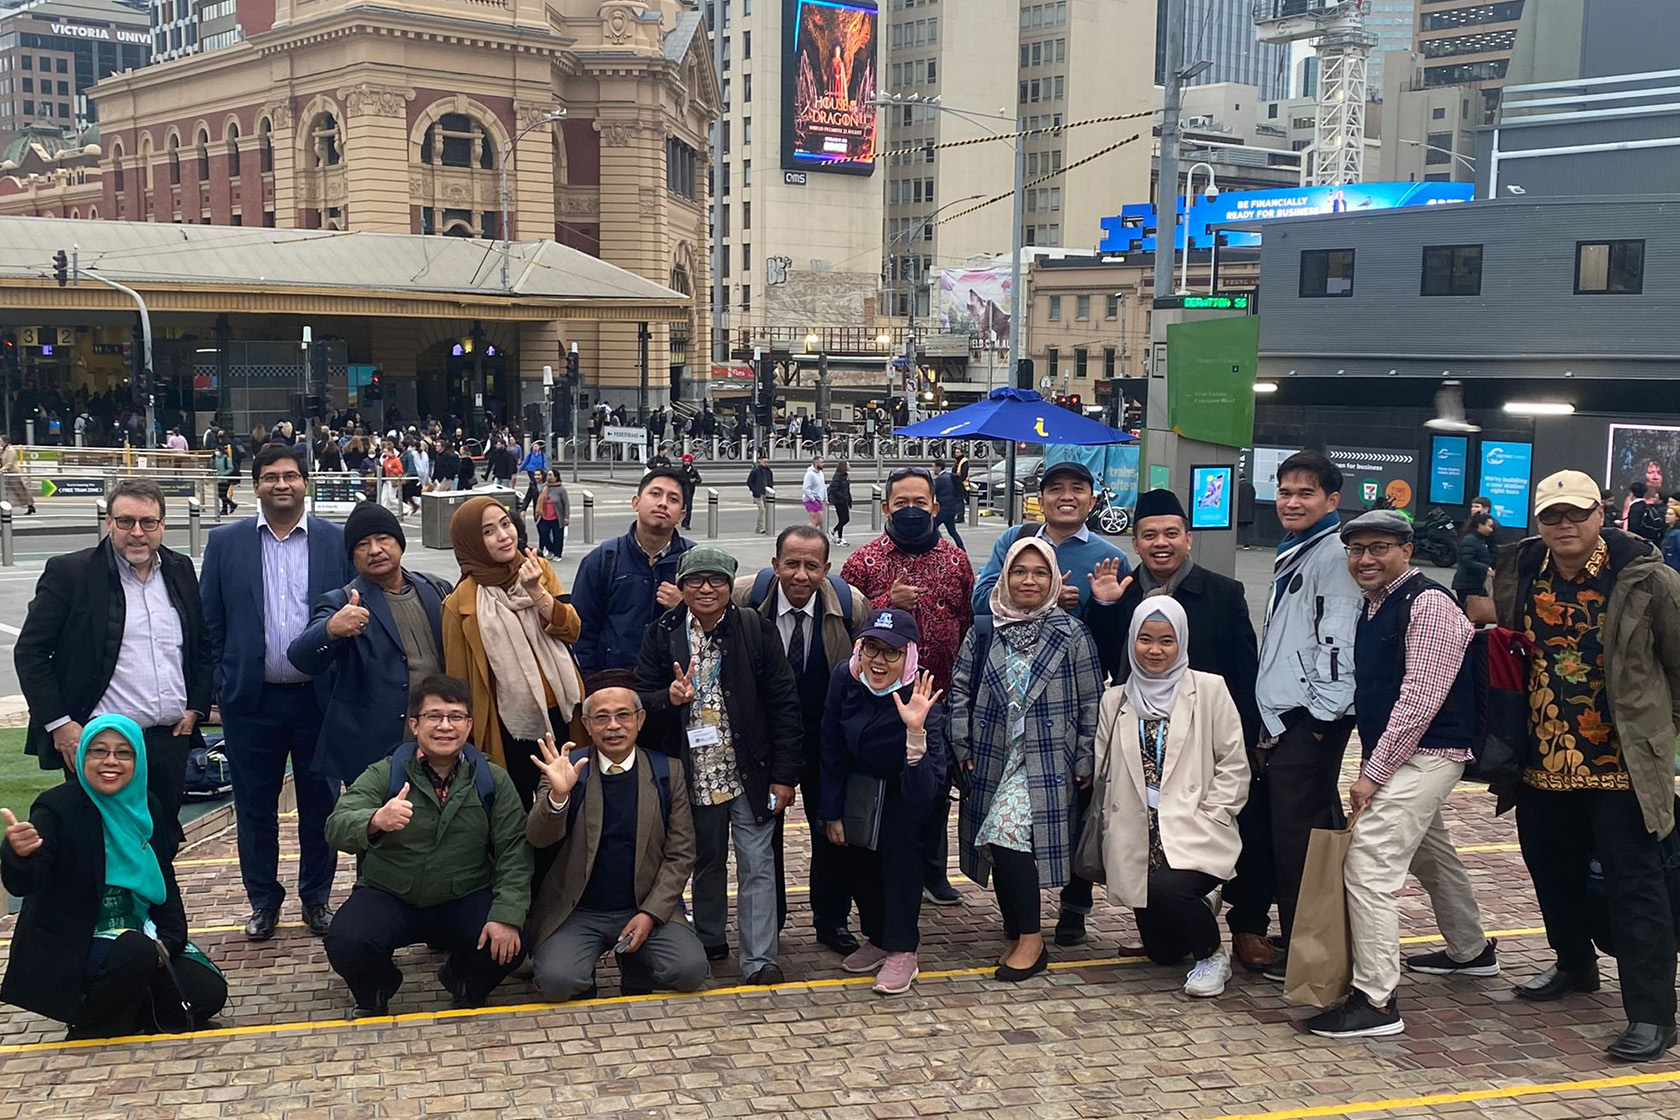 A group photo of participants with the famous Flinders Station in the background